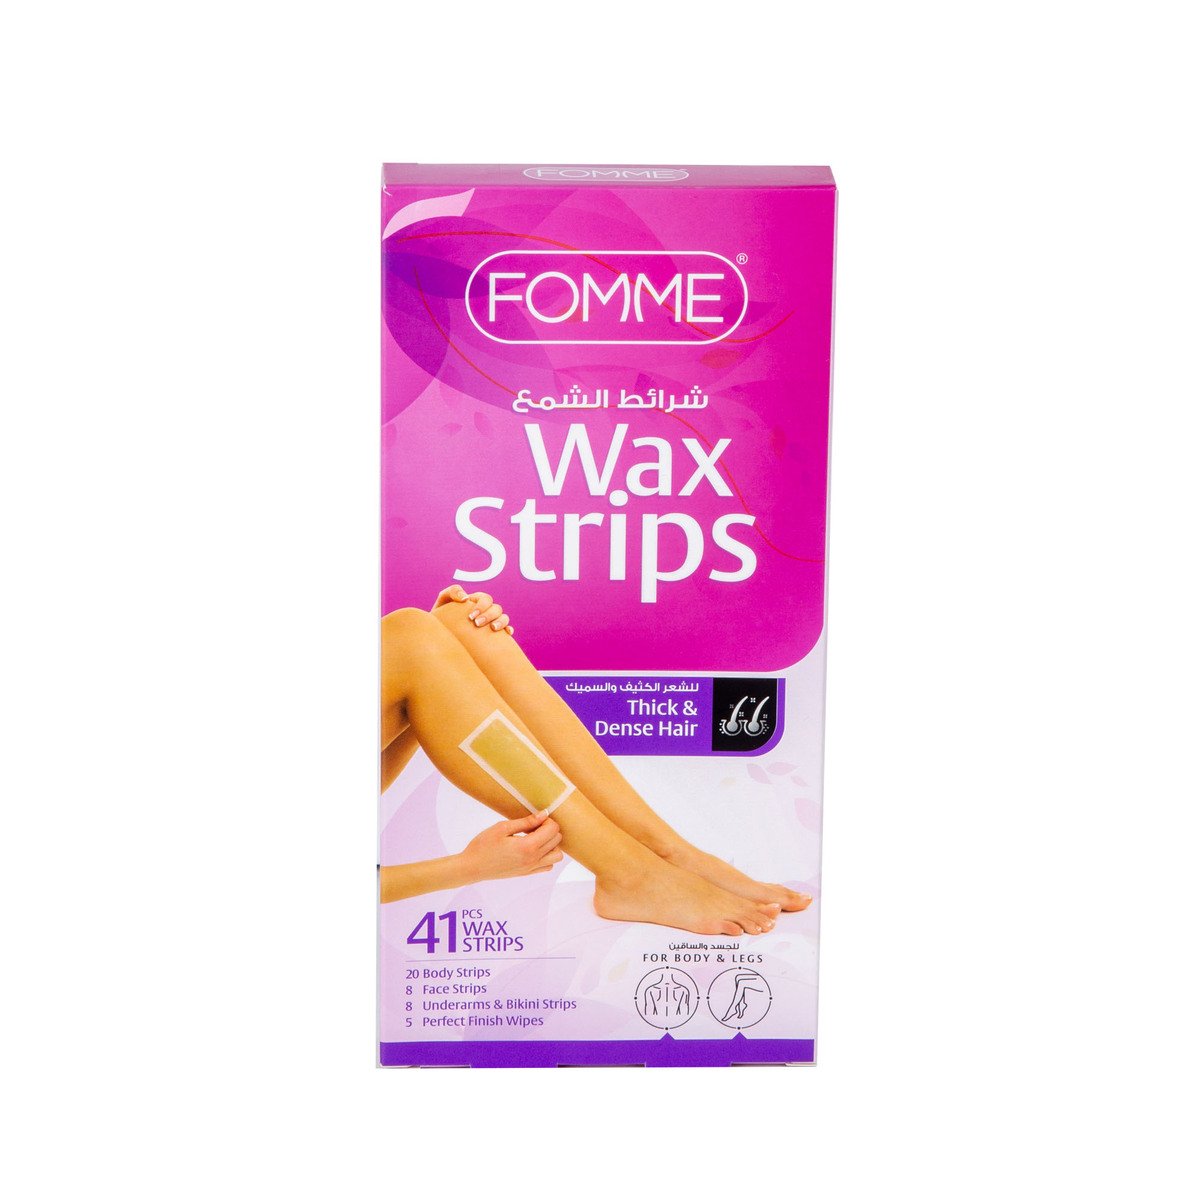 Fomme Thick & Dense Wax Strips For Body & Legs 41 pcs